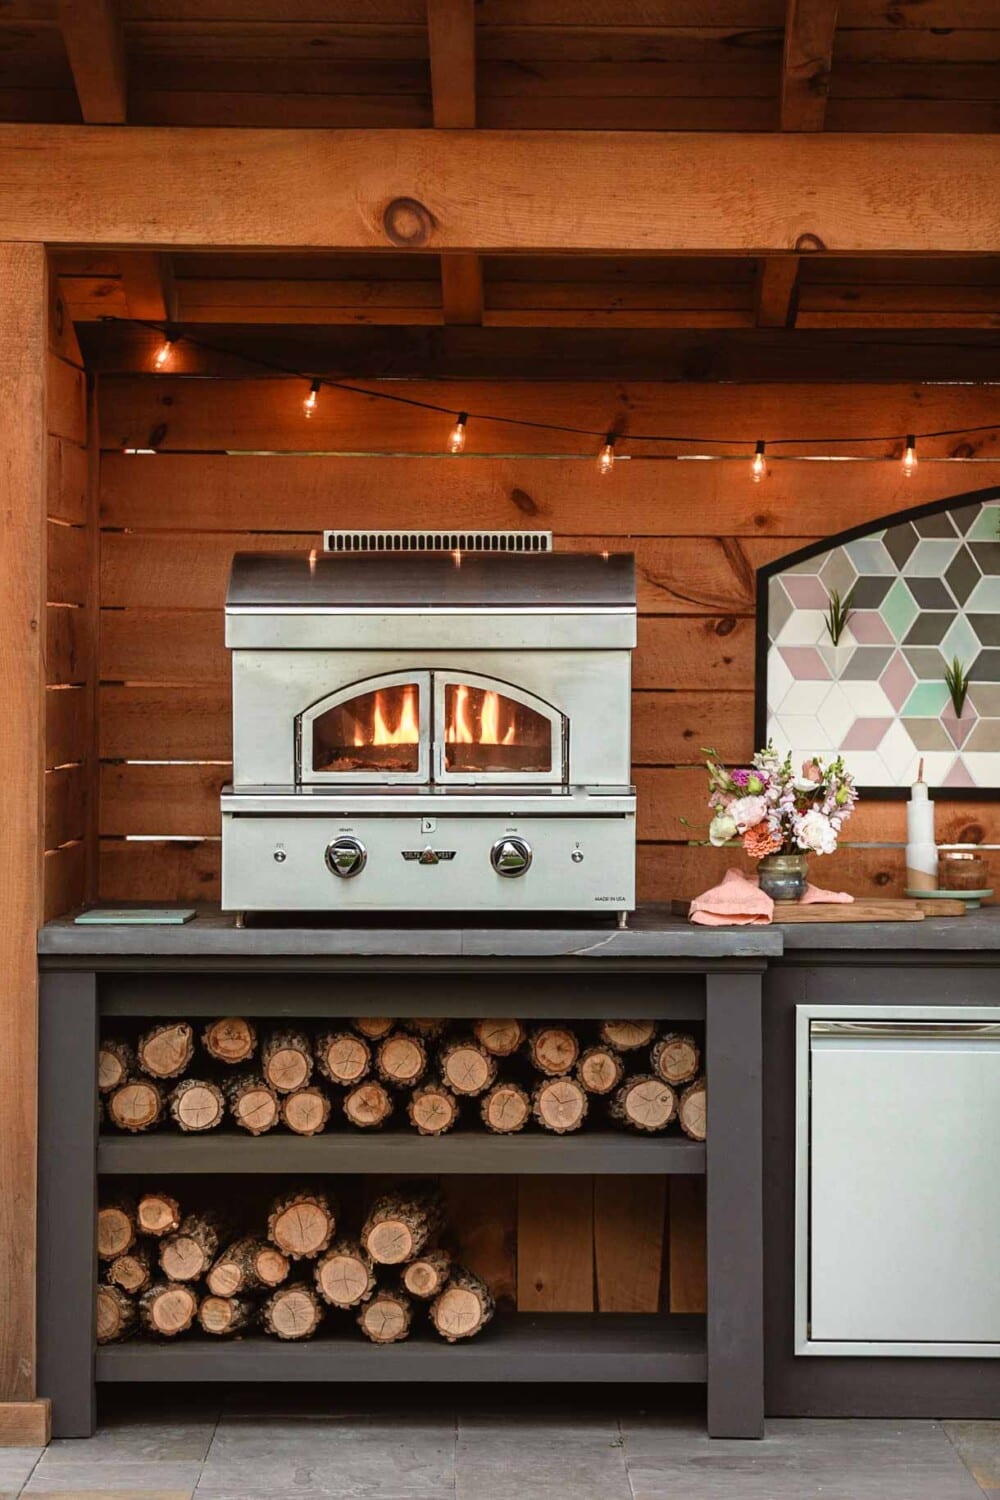 delta heat pizza oven in use in an outdoor kitchen